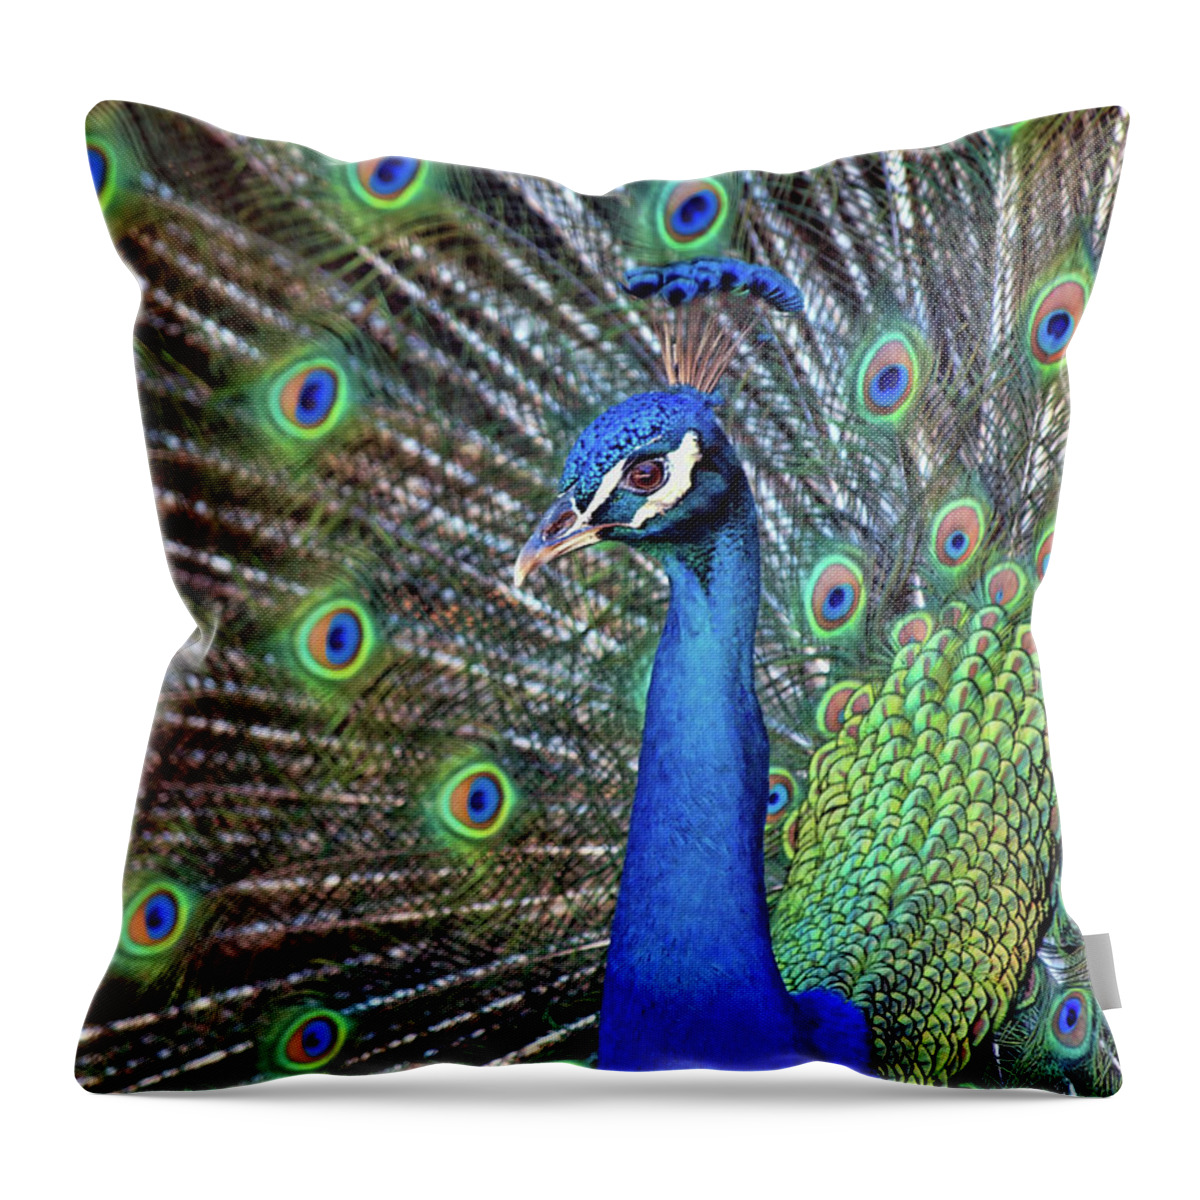 Animal Themes Throw Pillow featuring the photograph Magnificent Peacock by Sandra L. Grimm